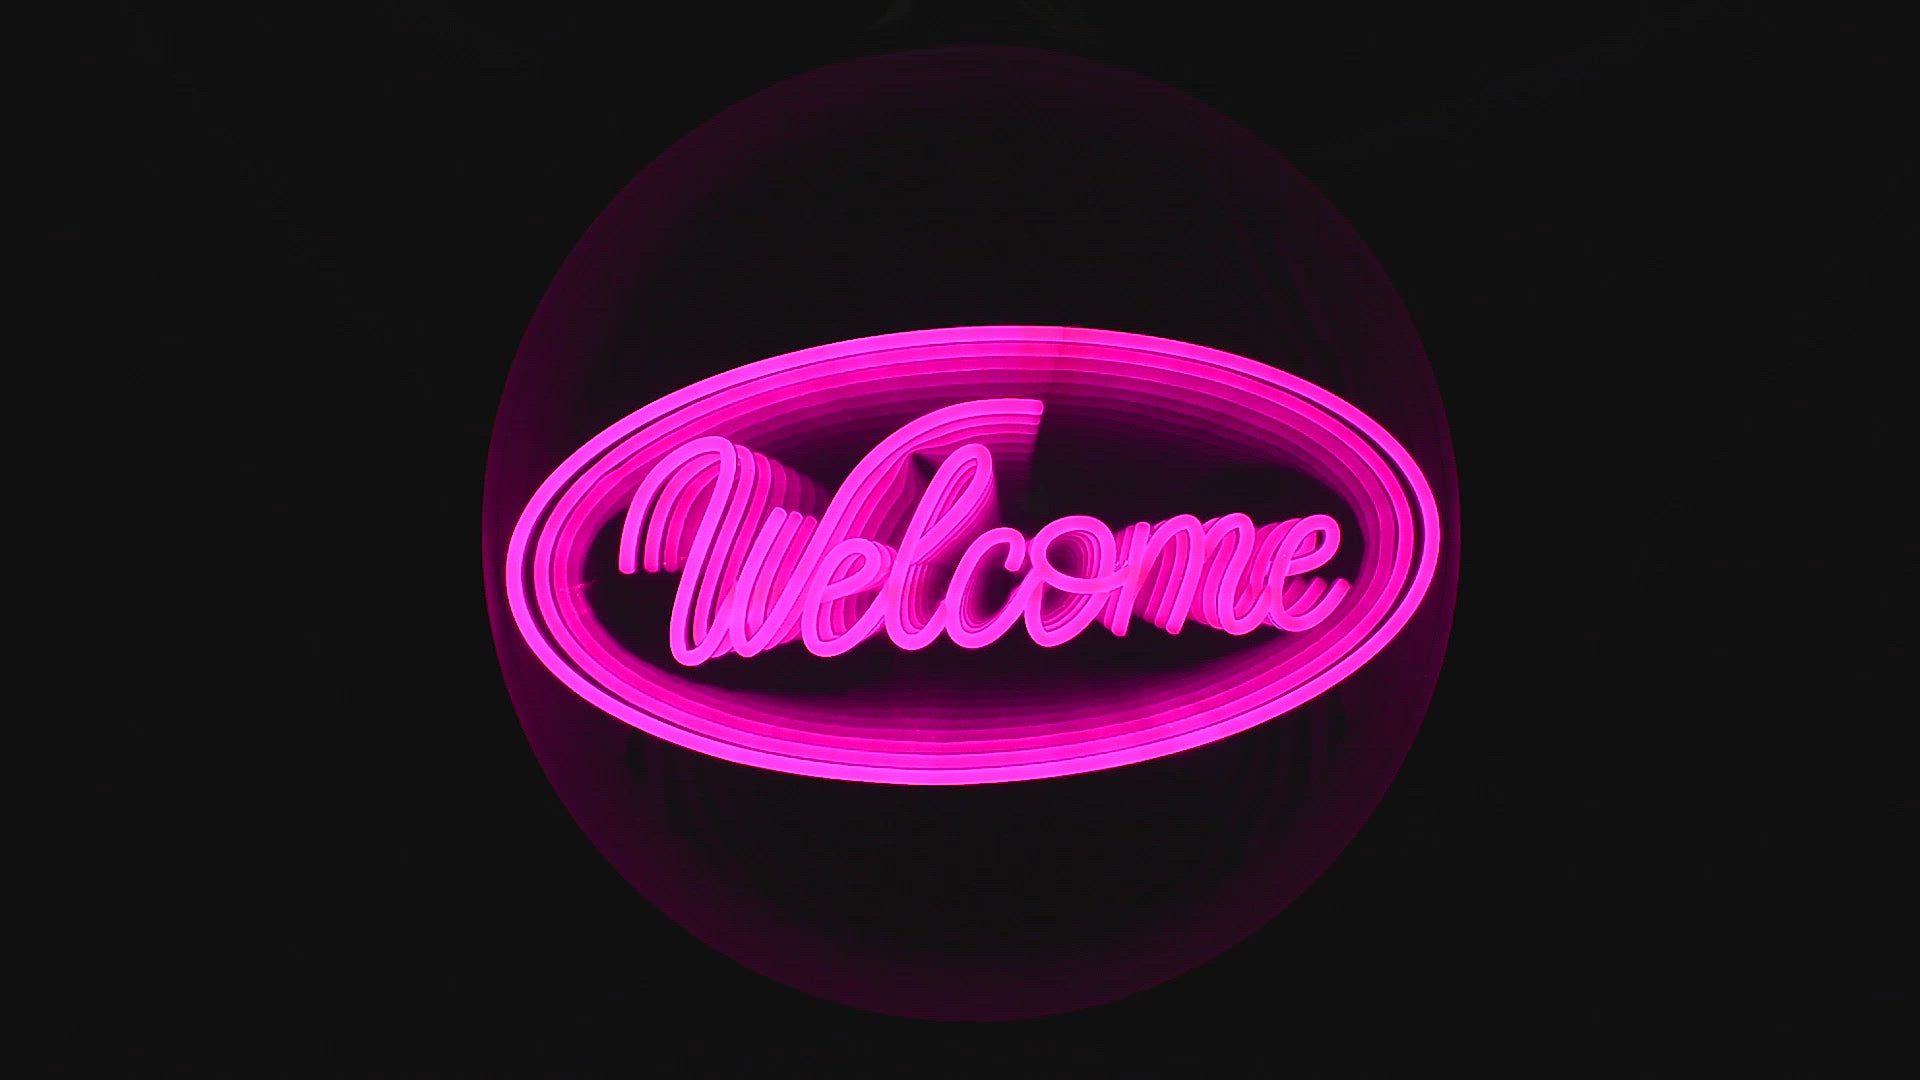 "Welcome" 3D Infinity LED Neonschrift